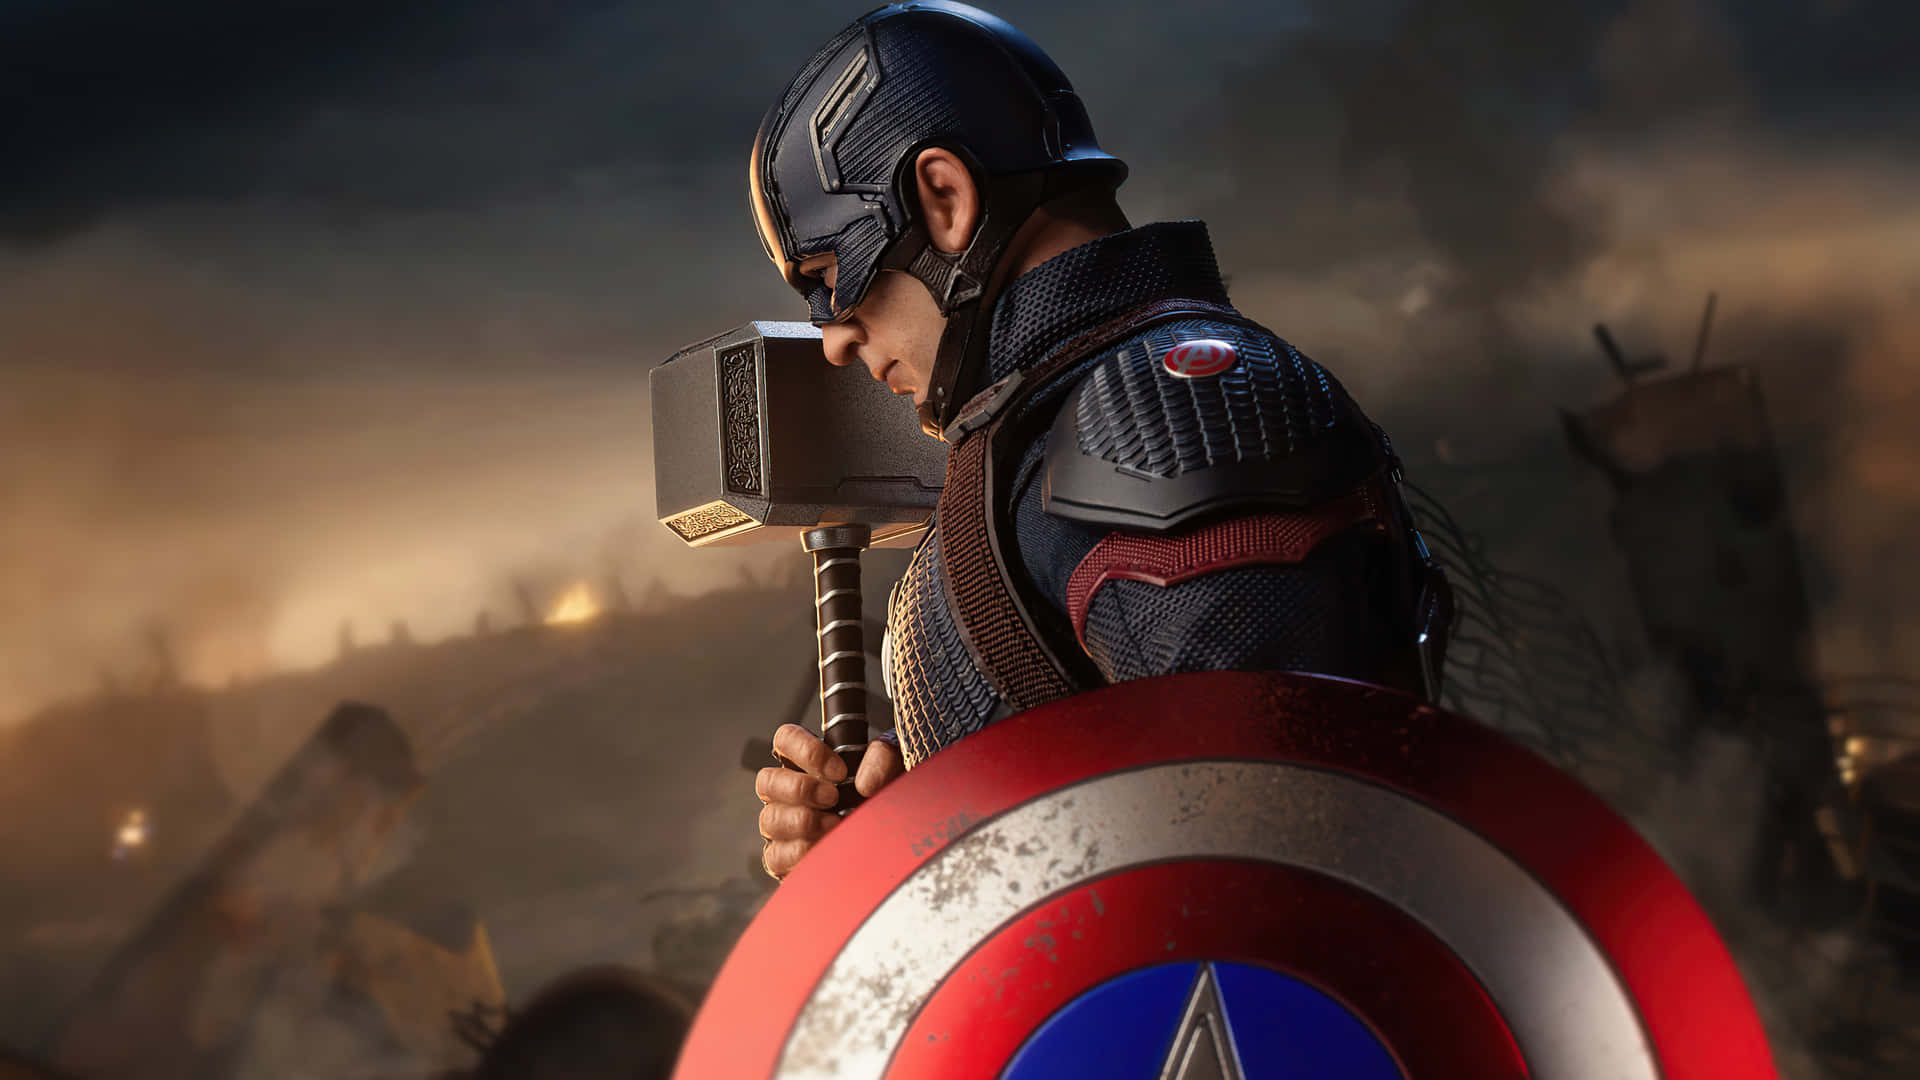 "The Shield of the First Avenger"